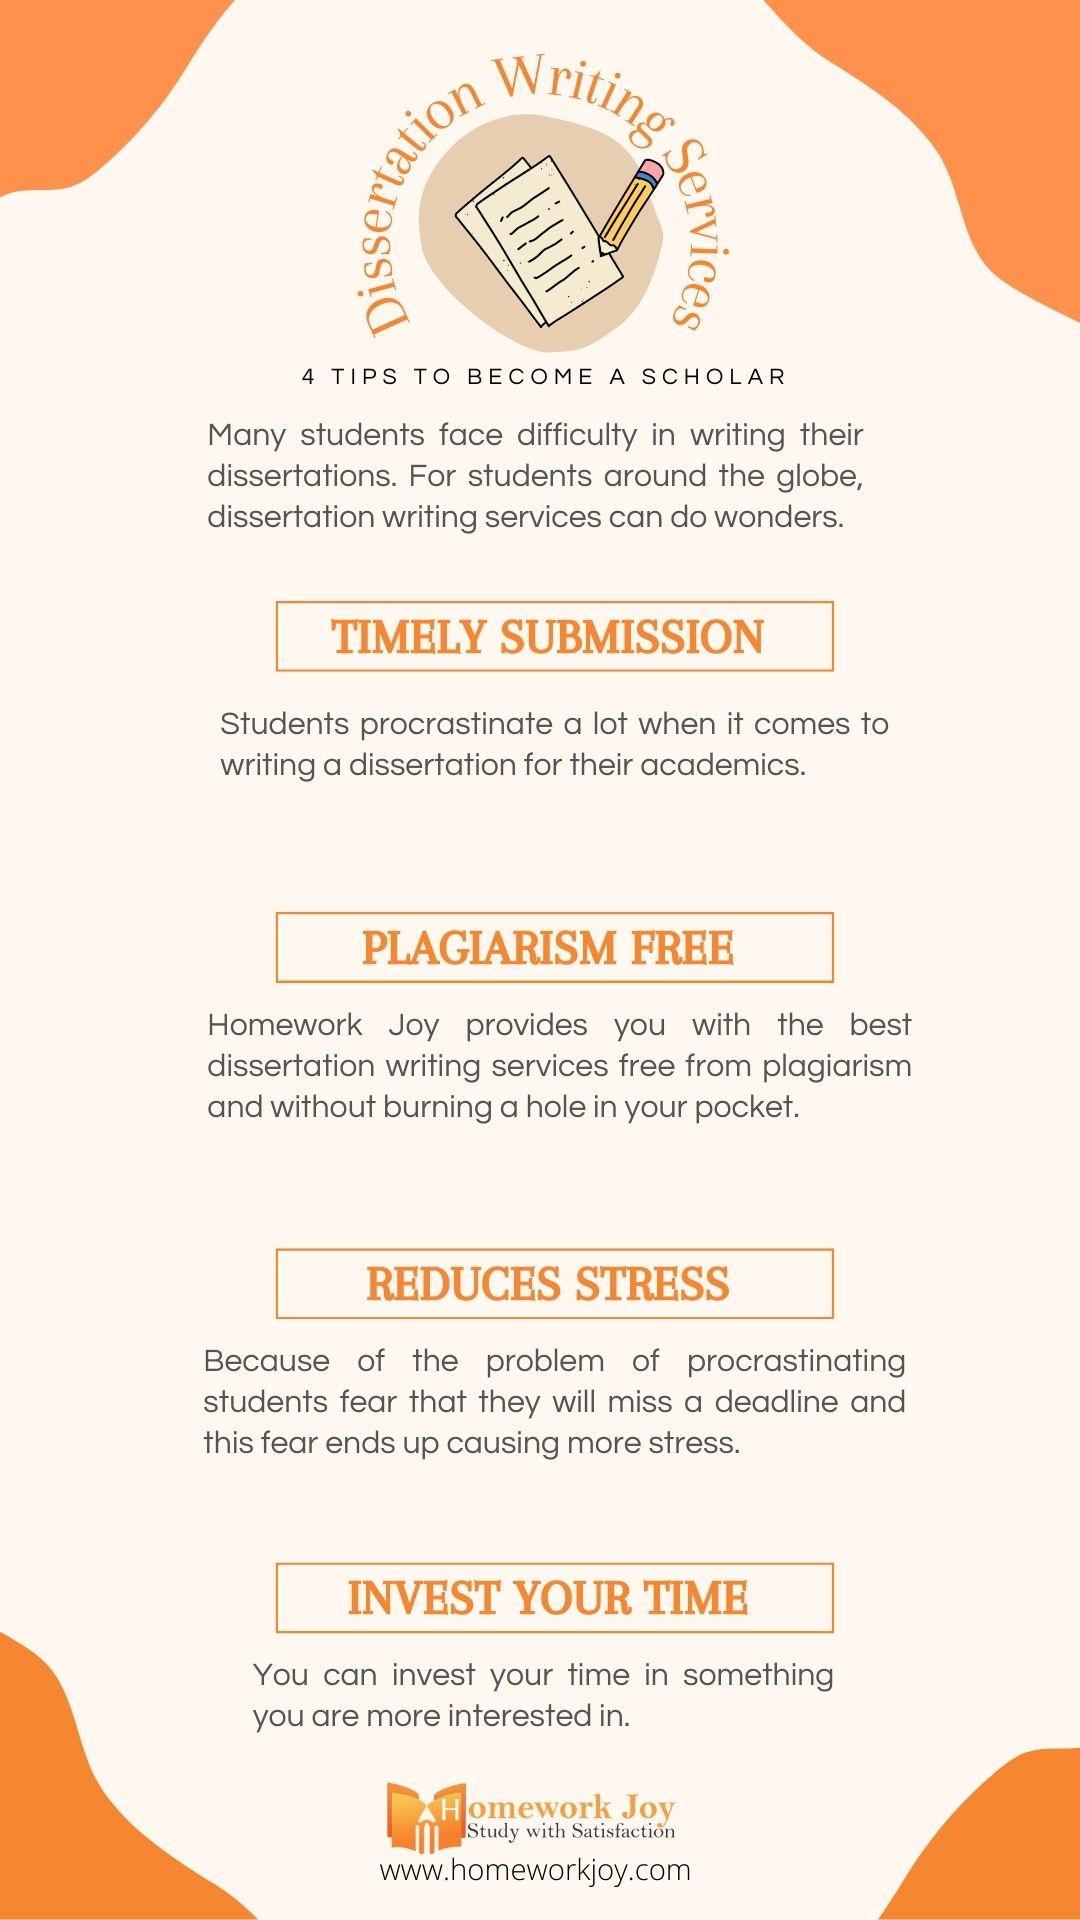 Dissertation Writing Services: 4 Tips to Become a Scholar